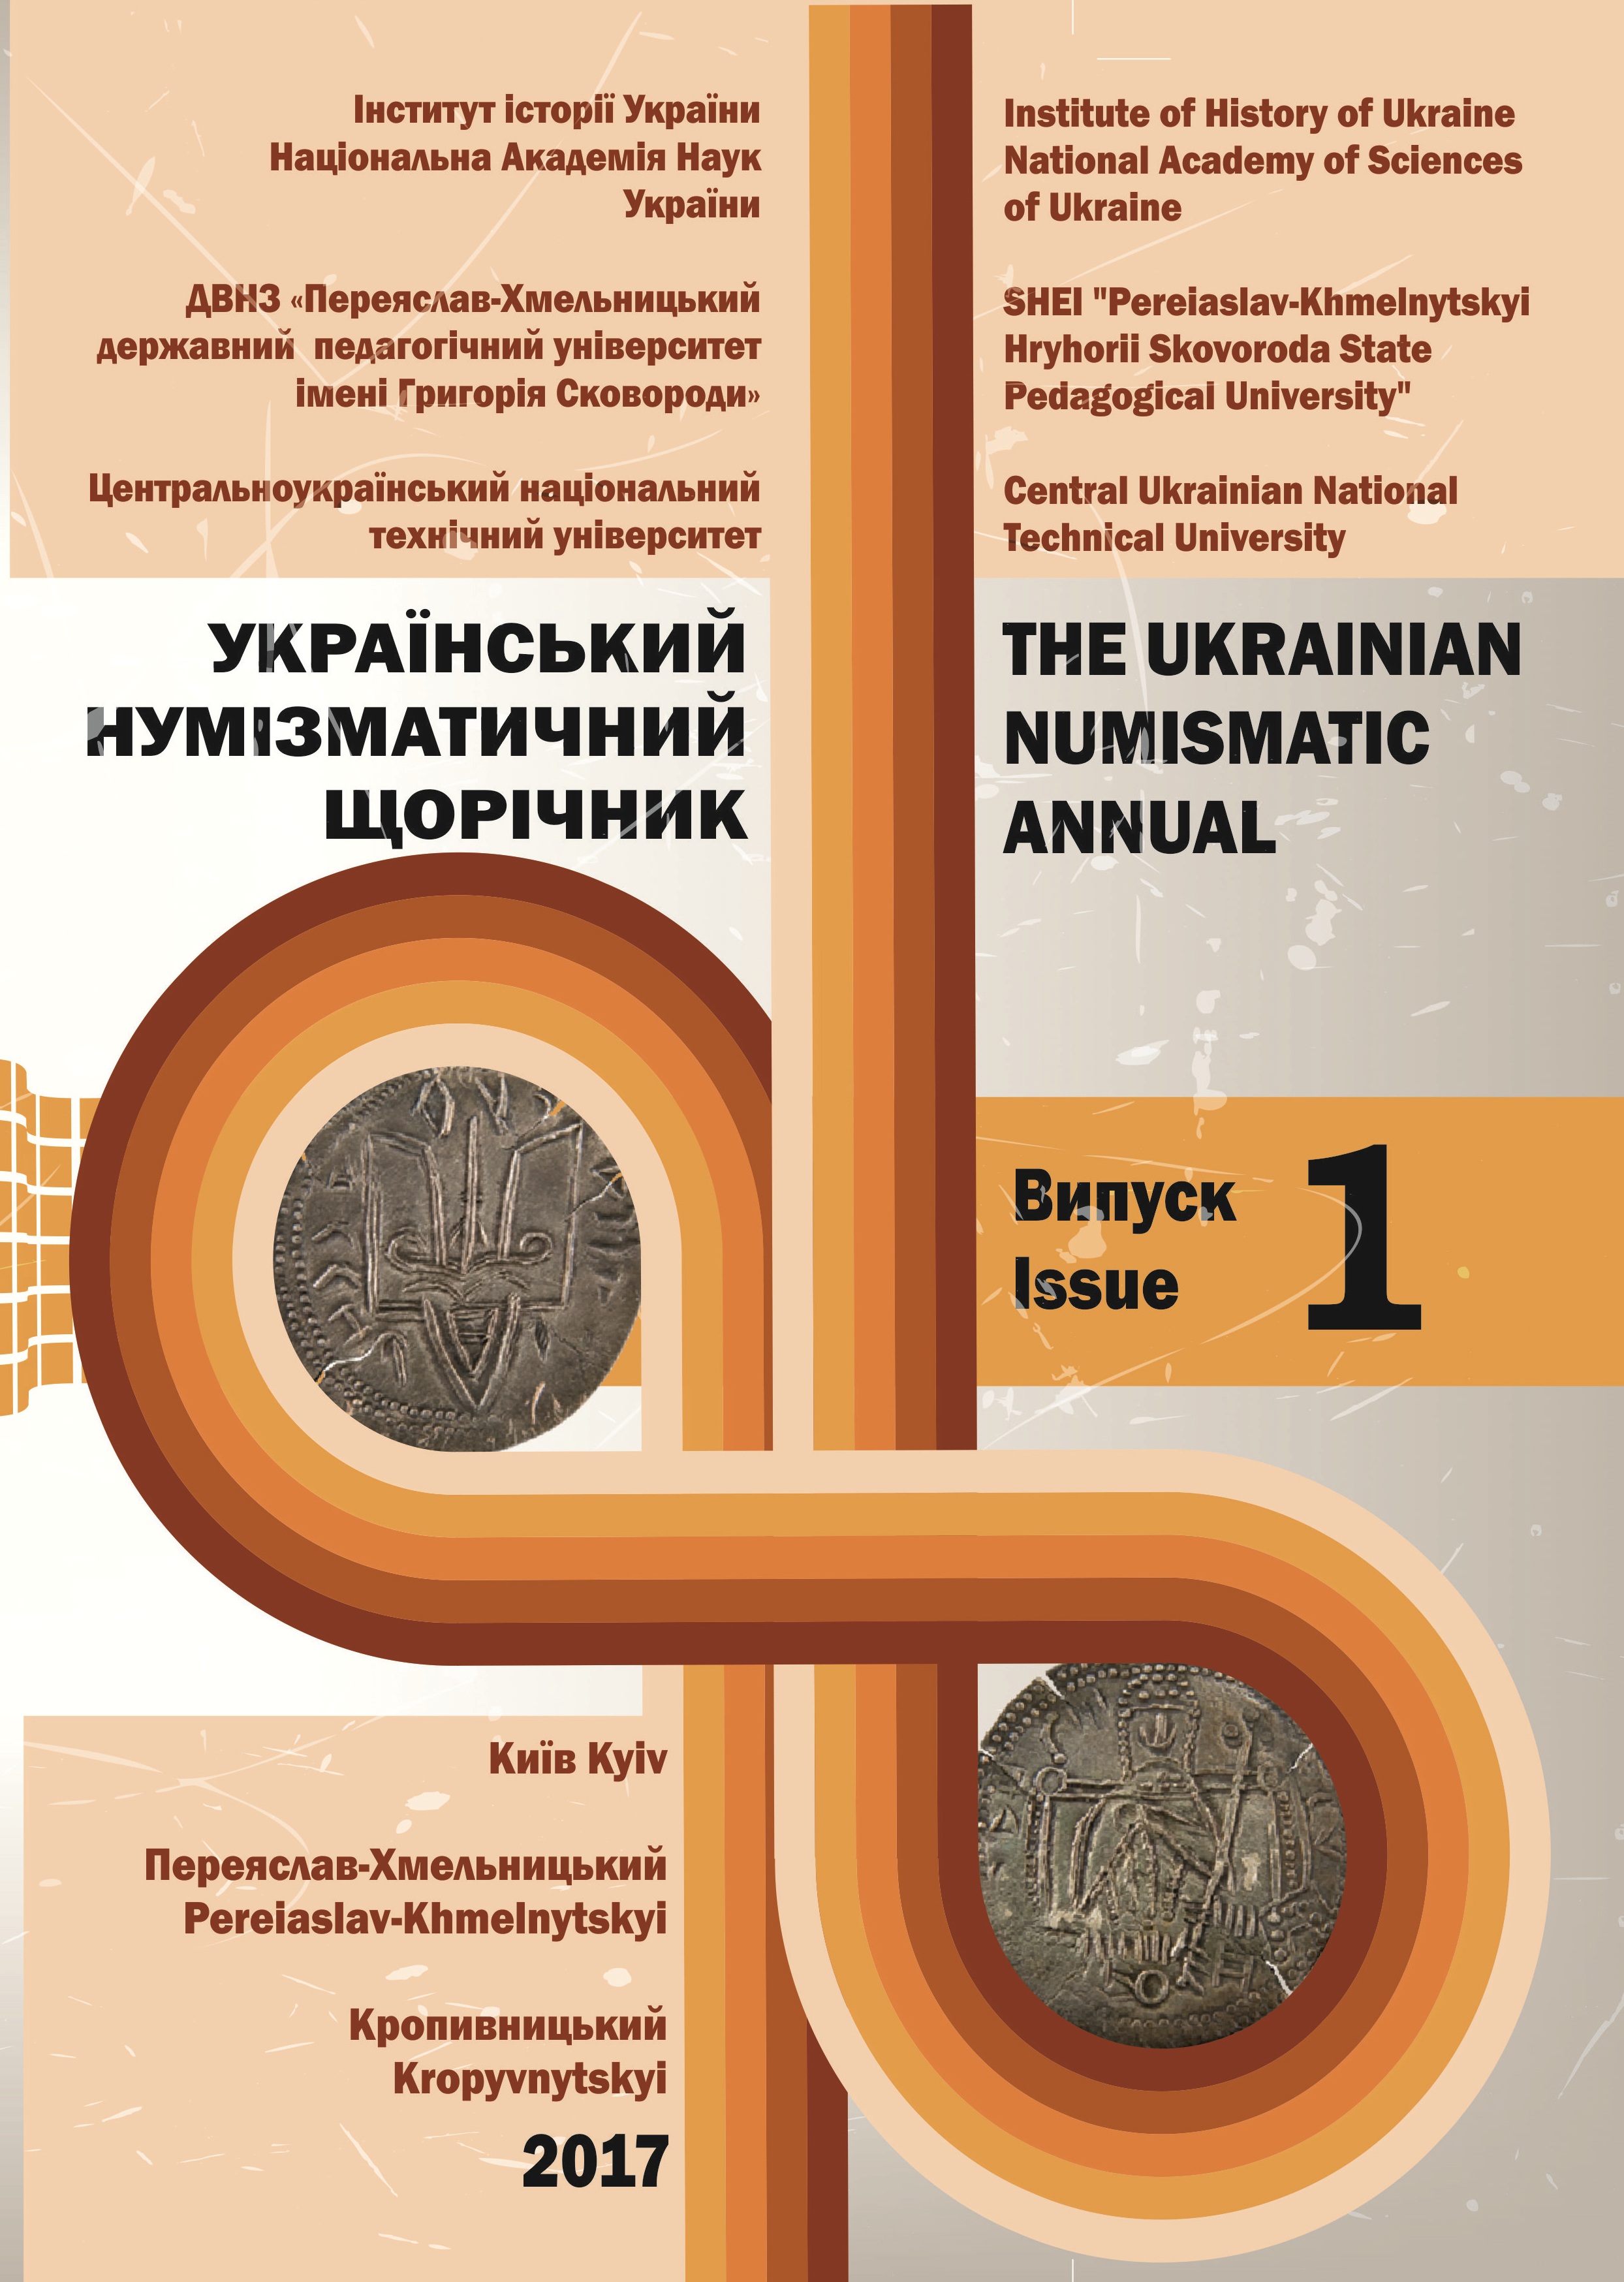 THE TOPOGRAPHY OF FINDINGS OF COINS OF THE STATE OF THE TEUTONIC ORDER IN PRUSSIA AND ITS LIVONIAN BRANCH IN UKRAINE (SUMMARISED INFORMATION BY REGIONS) Cover Image